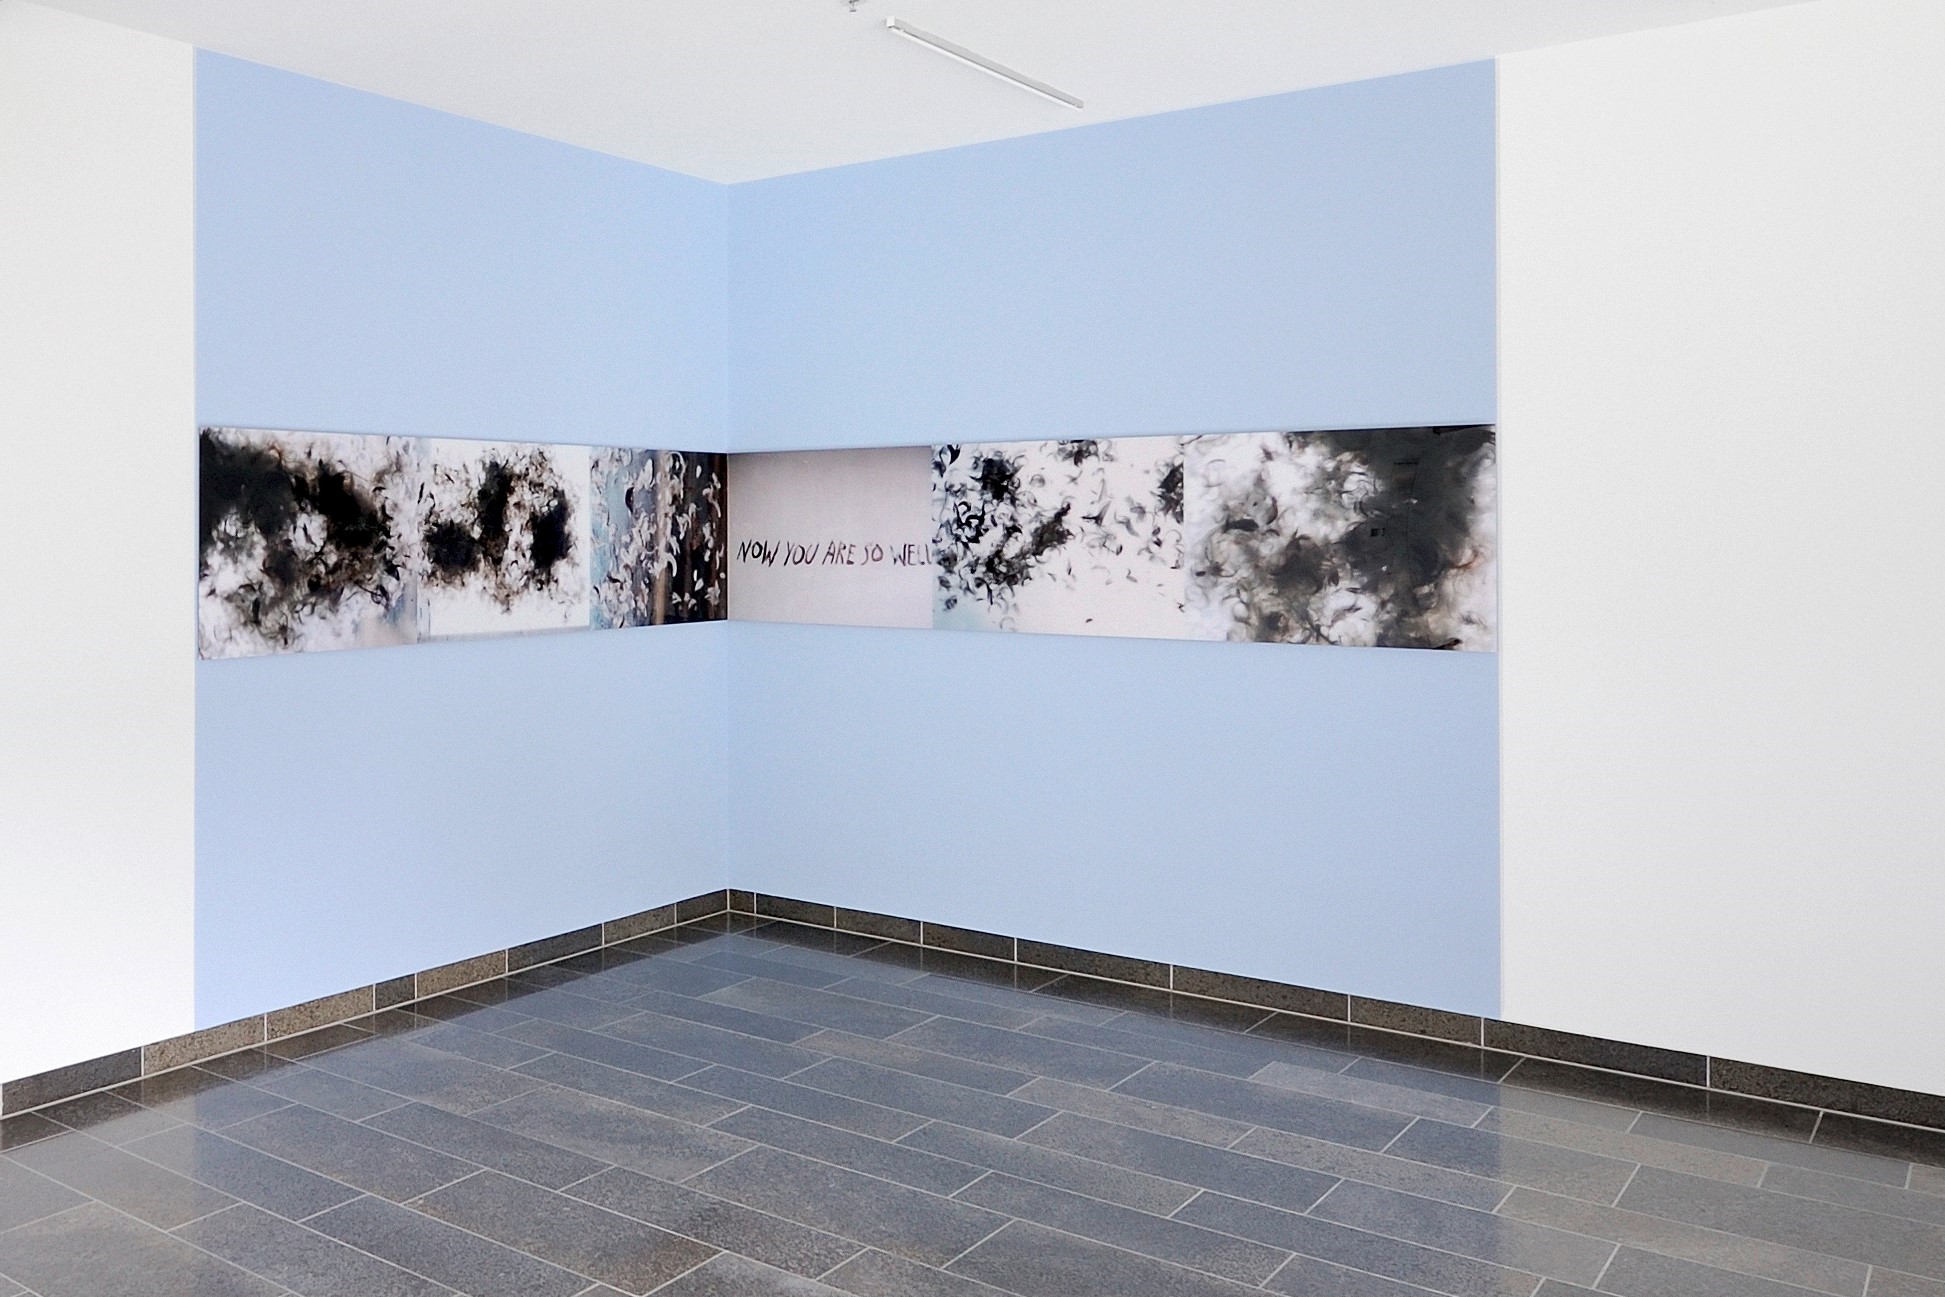 Flaka Haliti, Now You Are So Well, 2010 (Exhibition view)